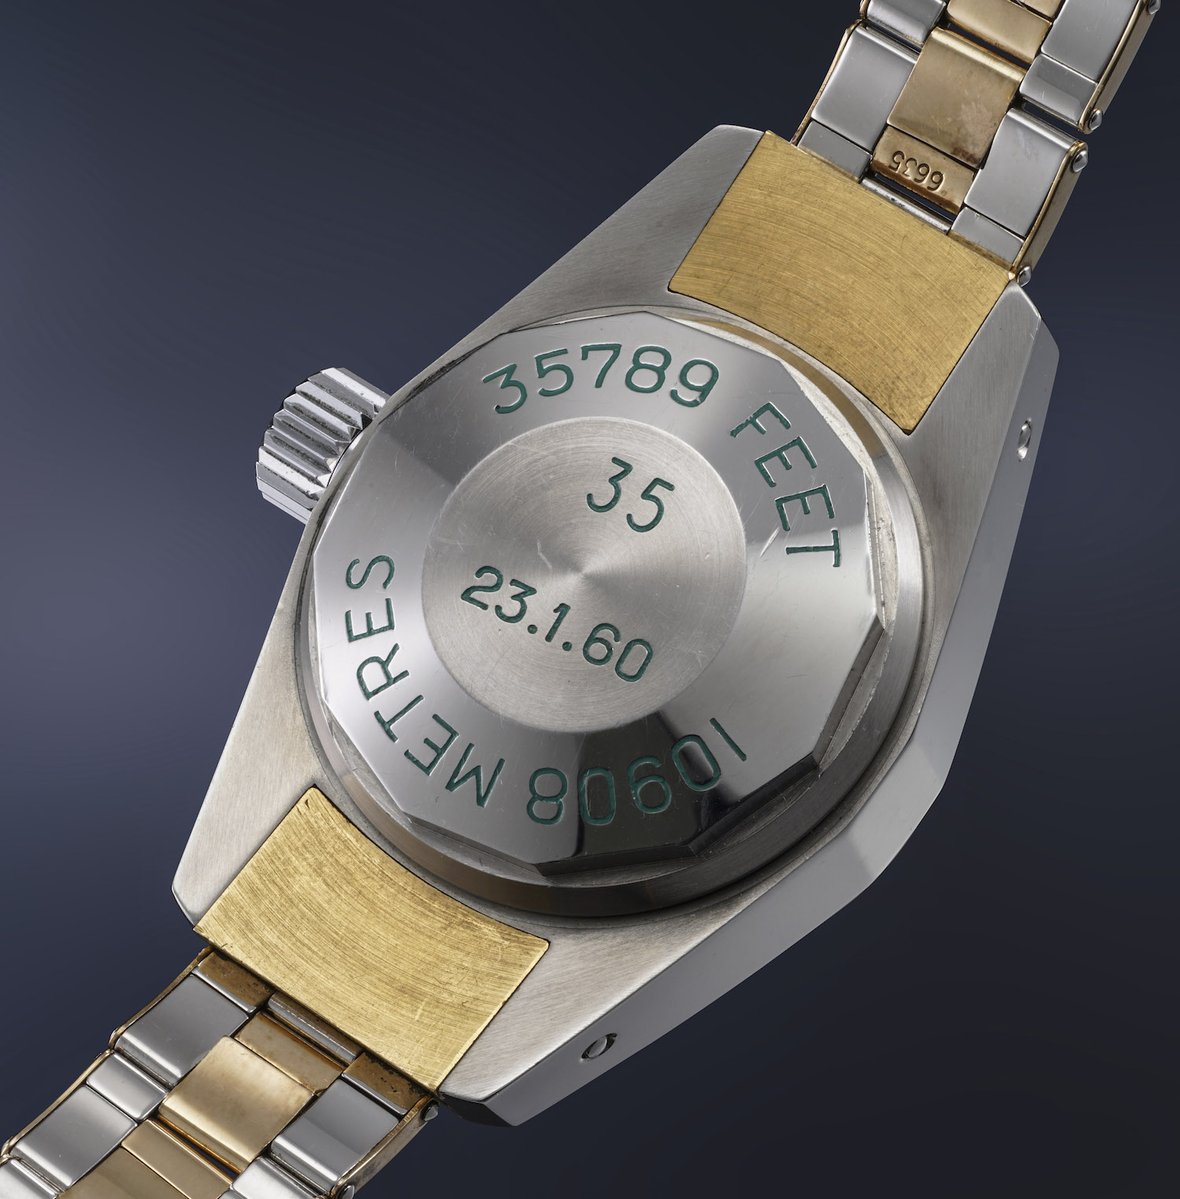 Ultra Rare Rolex Deep Sea Special To be Auctioned by Phillips bacs russo 2